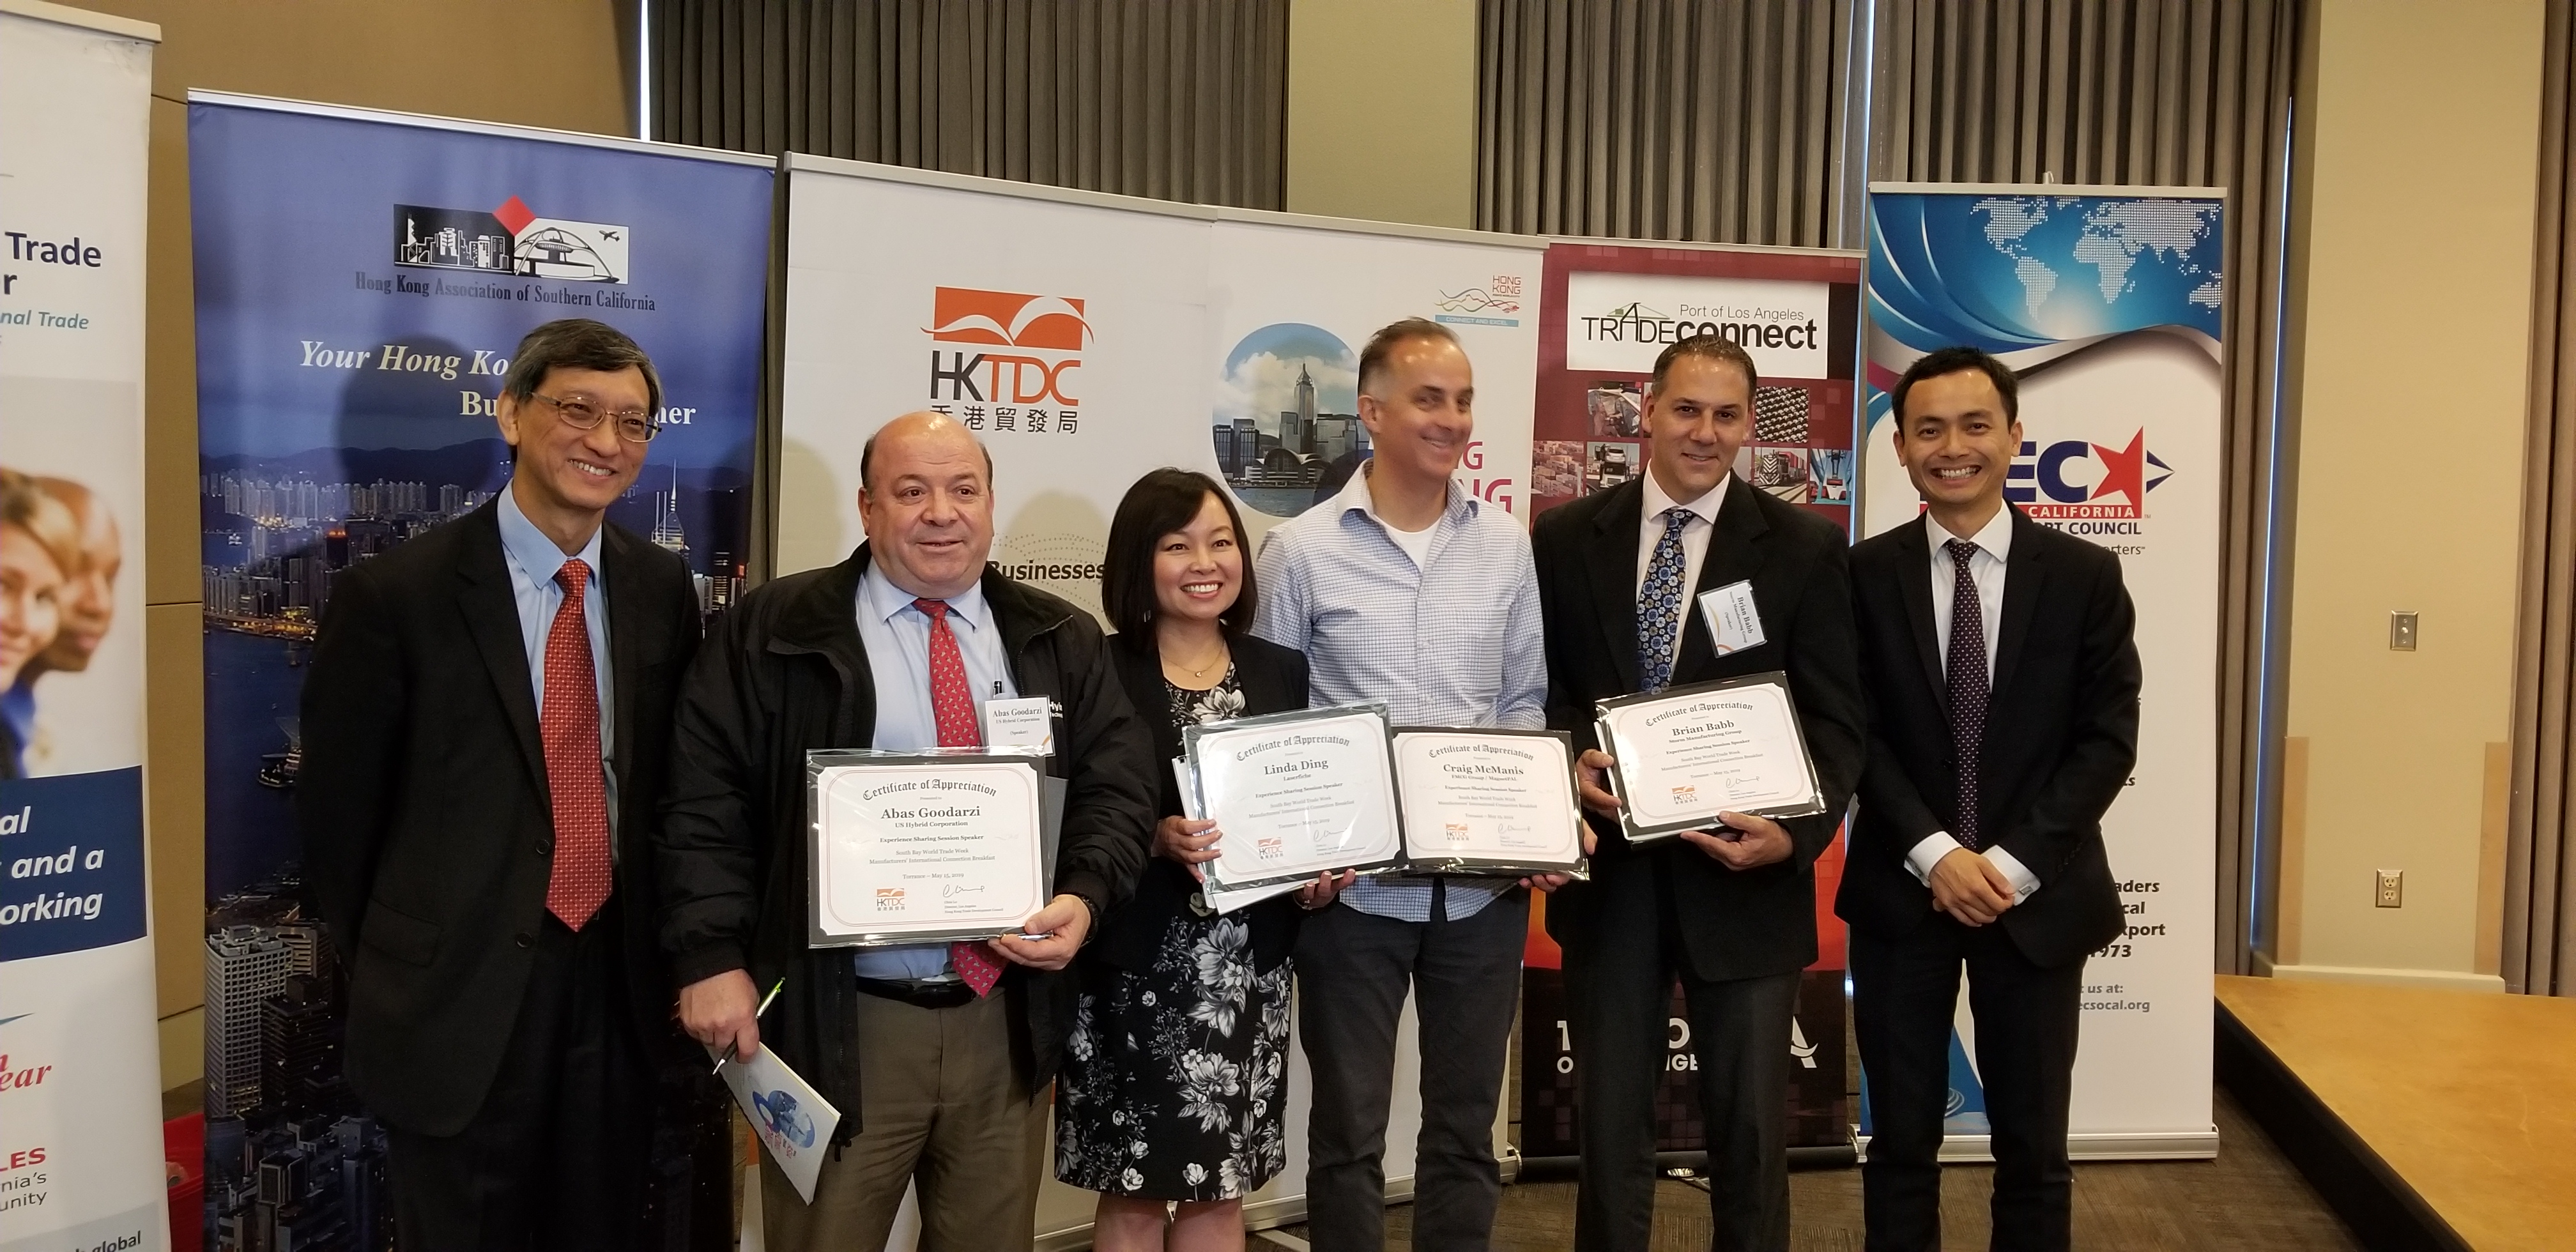 May 15, 2019 – South Bay World Trade Week – Manufacturers’ International Connection Breakfast